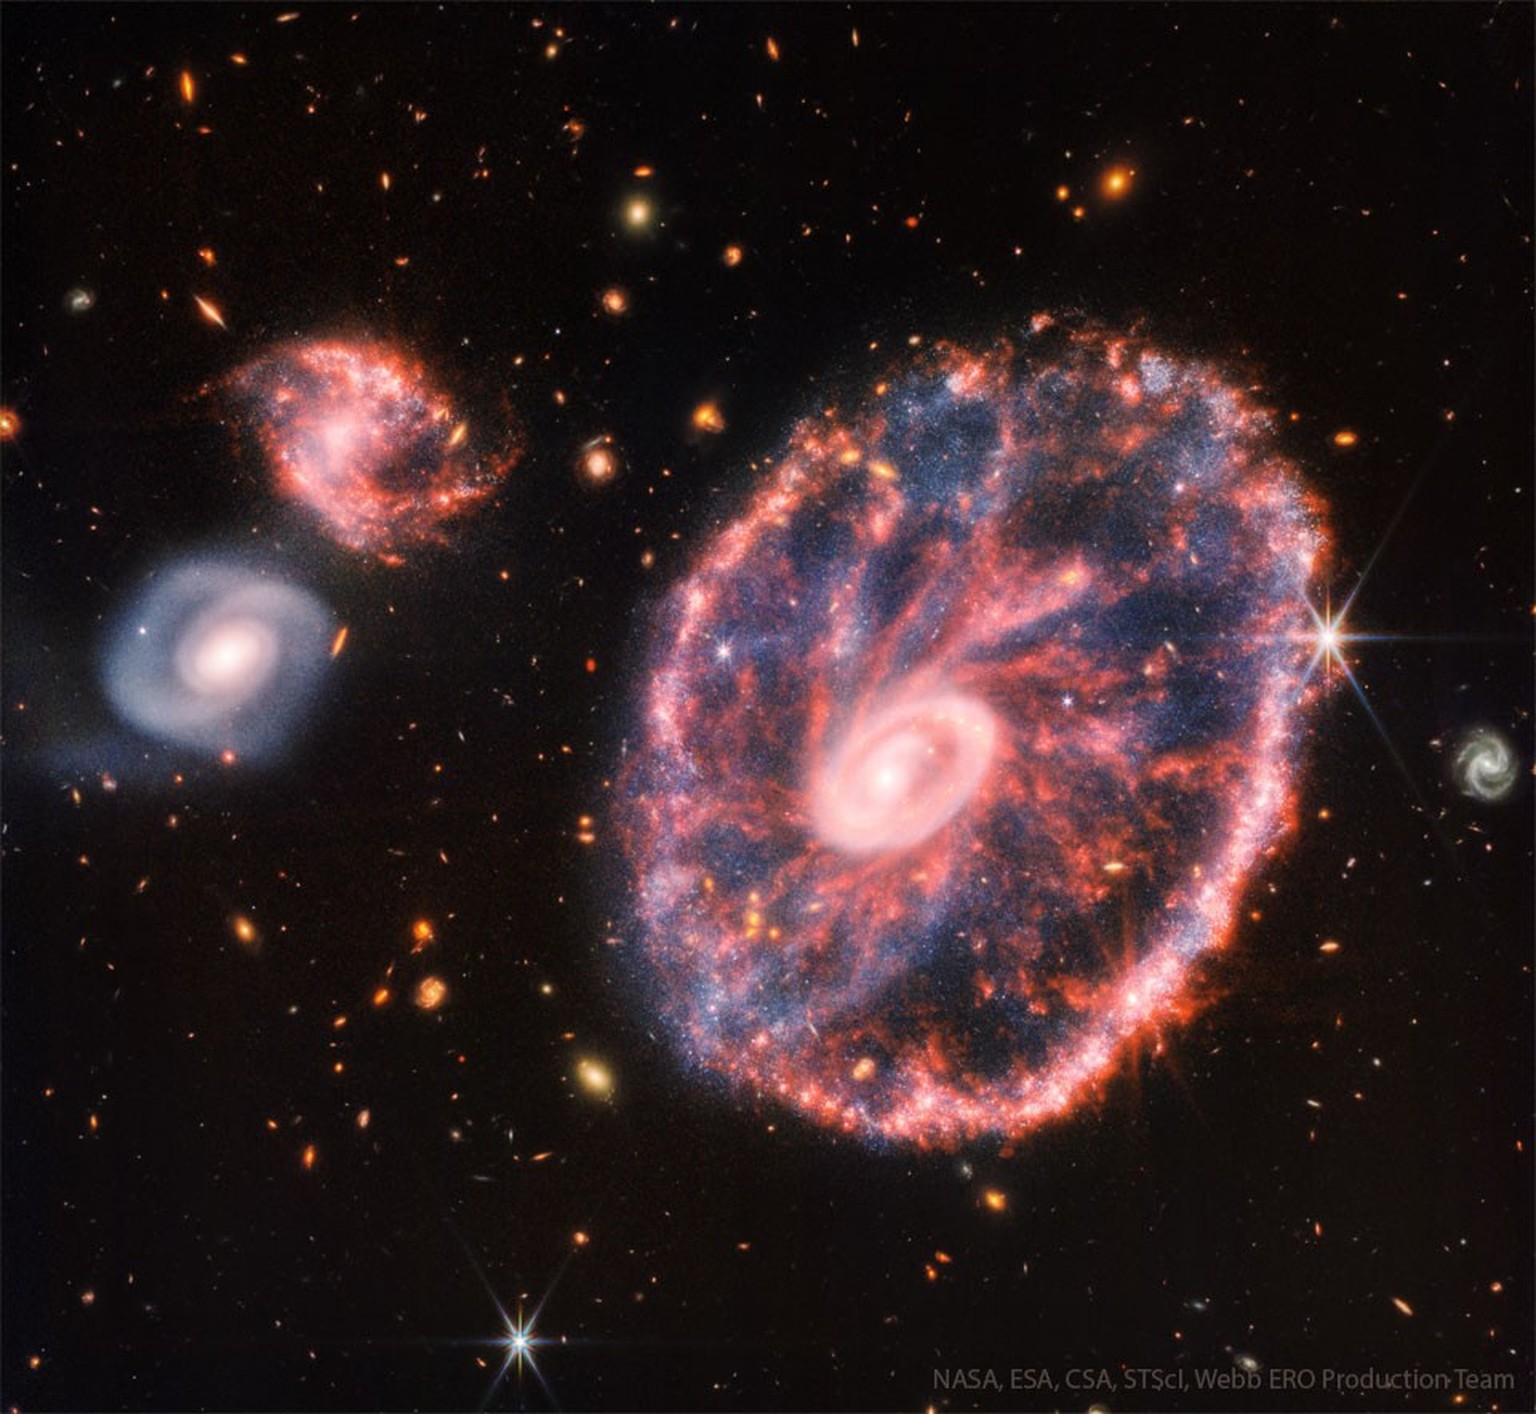 The Cartwheel Galaxy from Webb
To some, it looks like a wheel of a cart. In fact, because of its outward appearance, the presence of a central galaxy, and its connection with what looks like the spoke ...